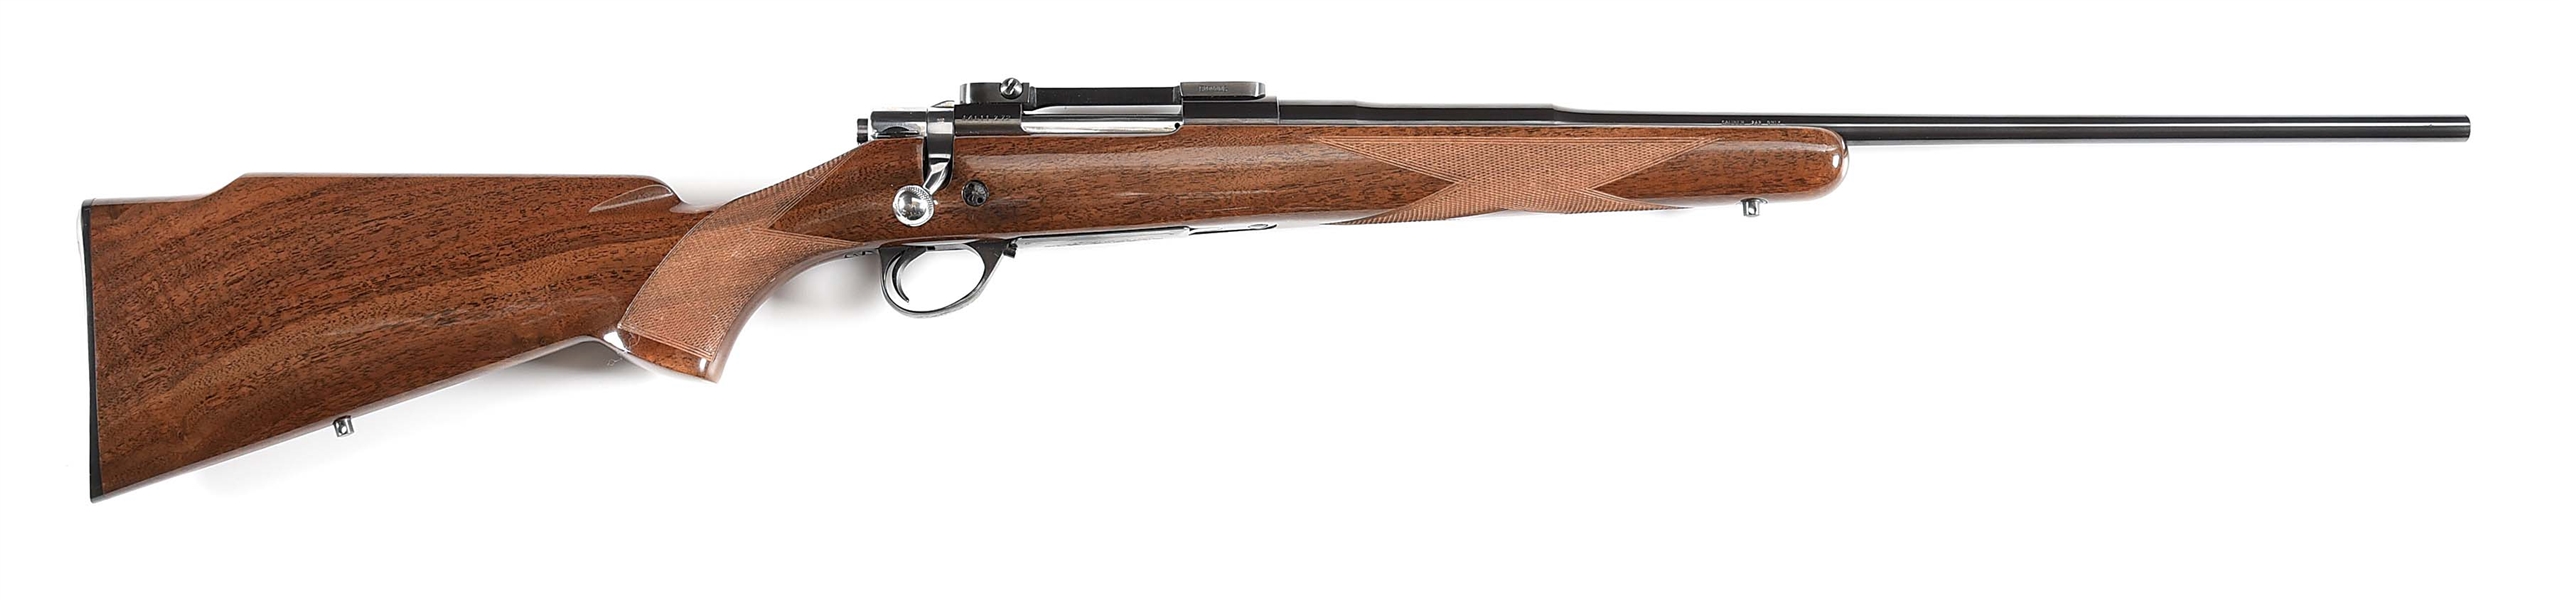 (M) BROWNING HIGH POWER BOLT ACTION RIFLE IN .243 WINCHESTER.